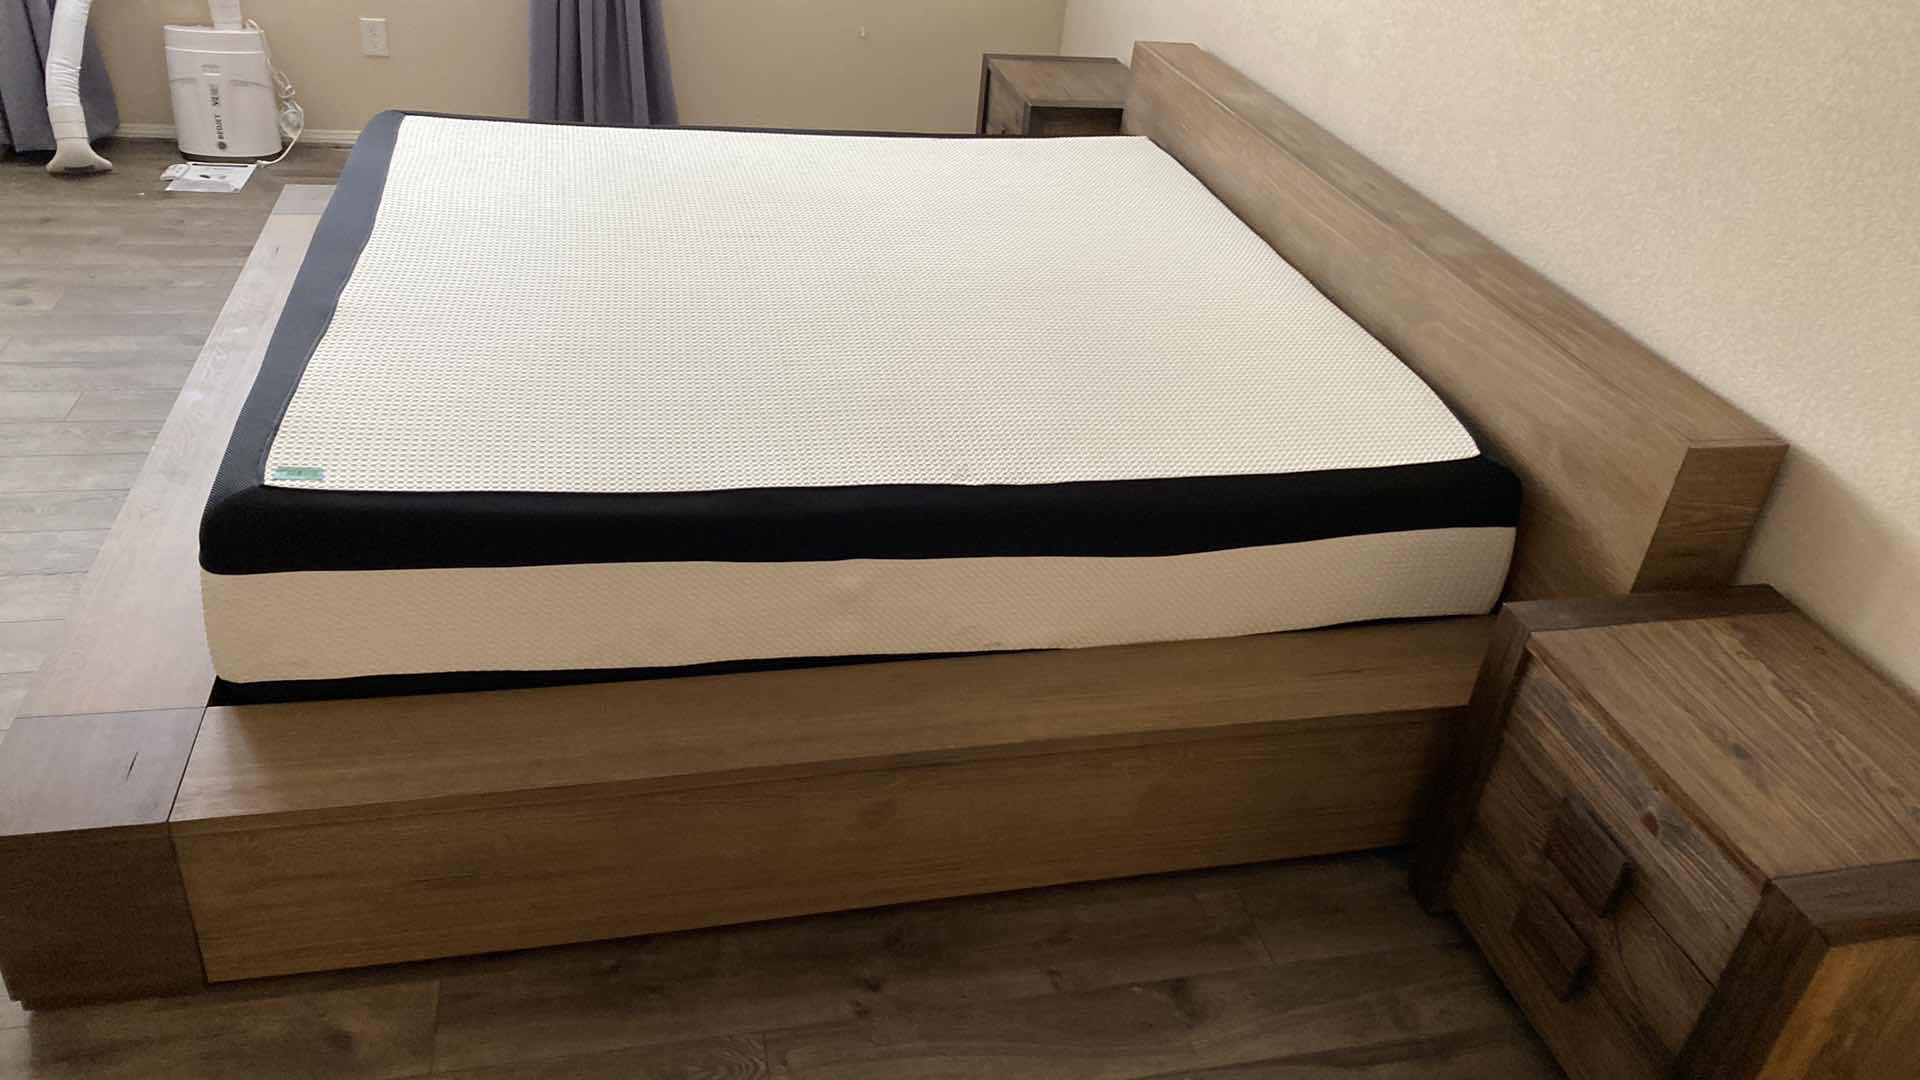 Photo 3 of MODERN WOOD LAMINATE BEDFRAME KING 95“ x 97“ H 30” WITH 2 NIGHT STANDS 24” x 22” H 22” - MATTRESS SOLD SEPARATELY